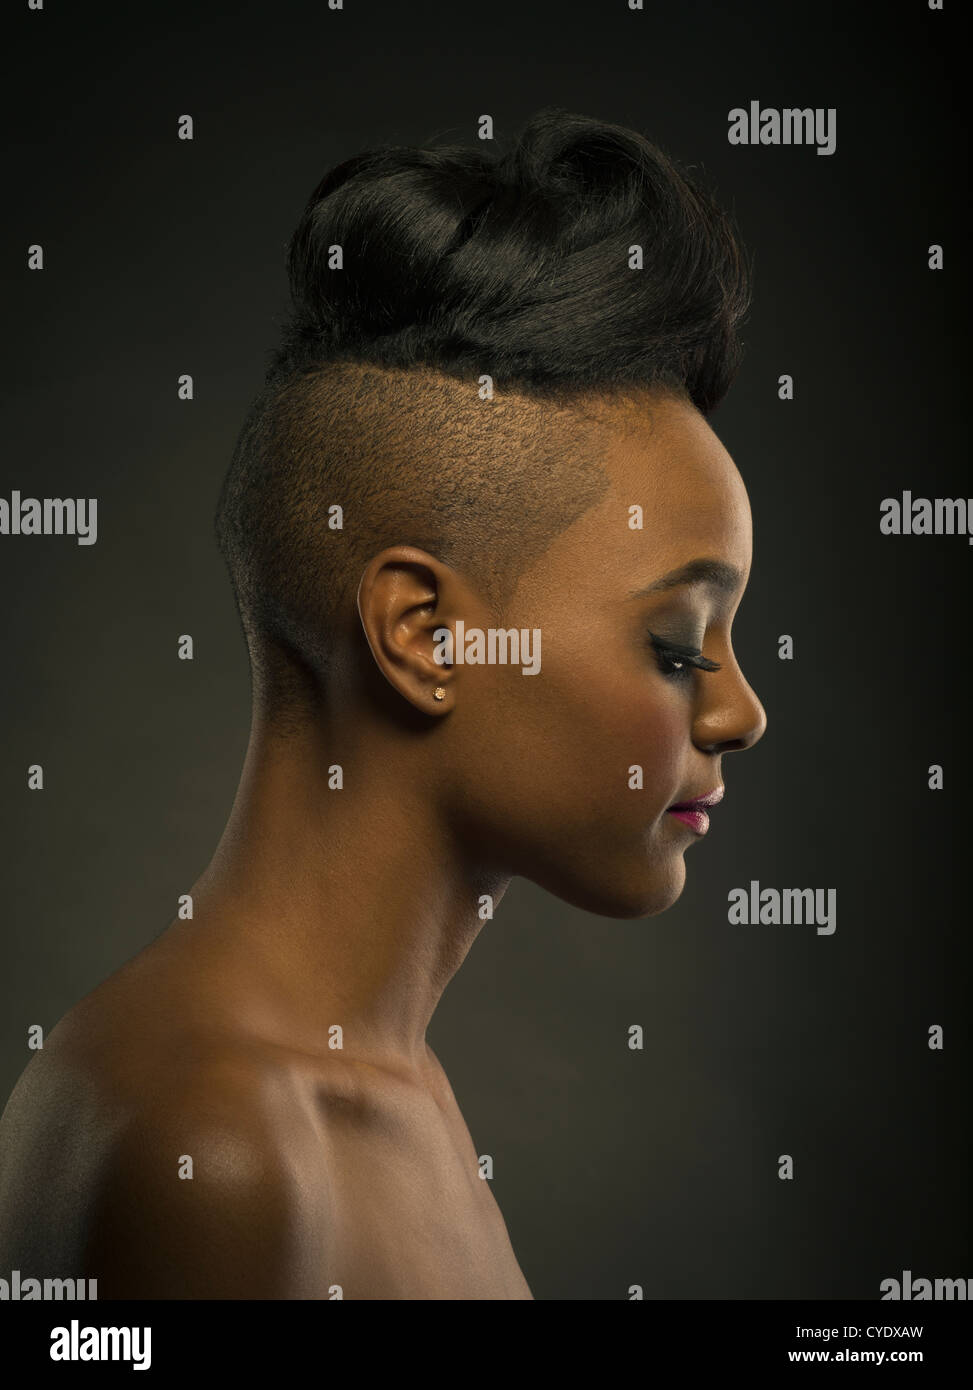 Woman with stylish haircut -  head shaved at sides and long hair on top. Stock Photo